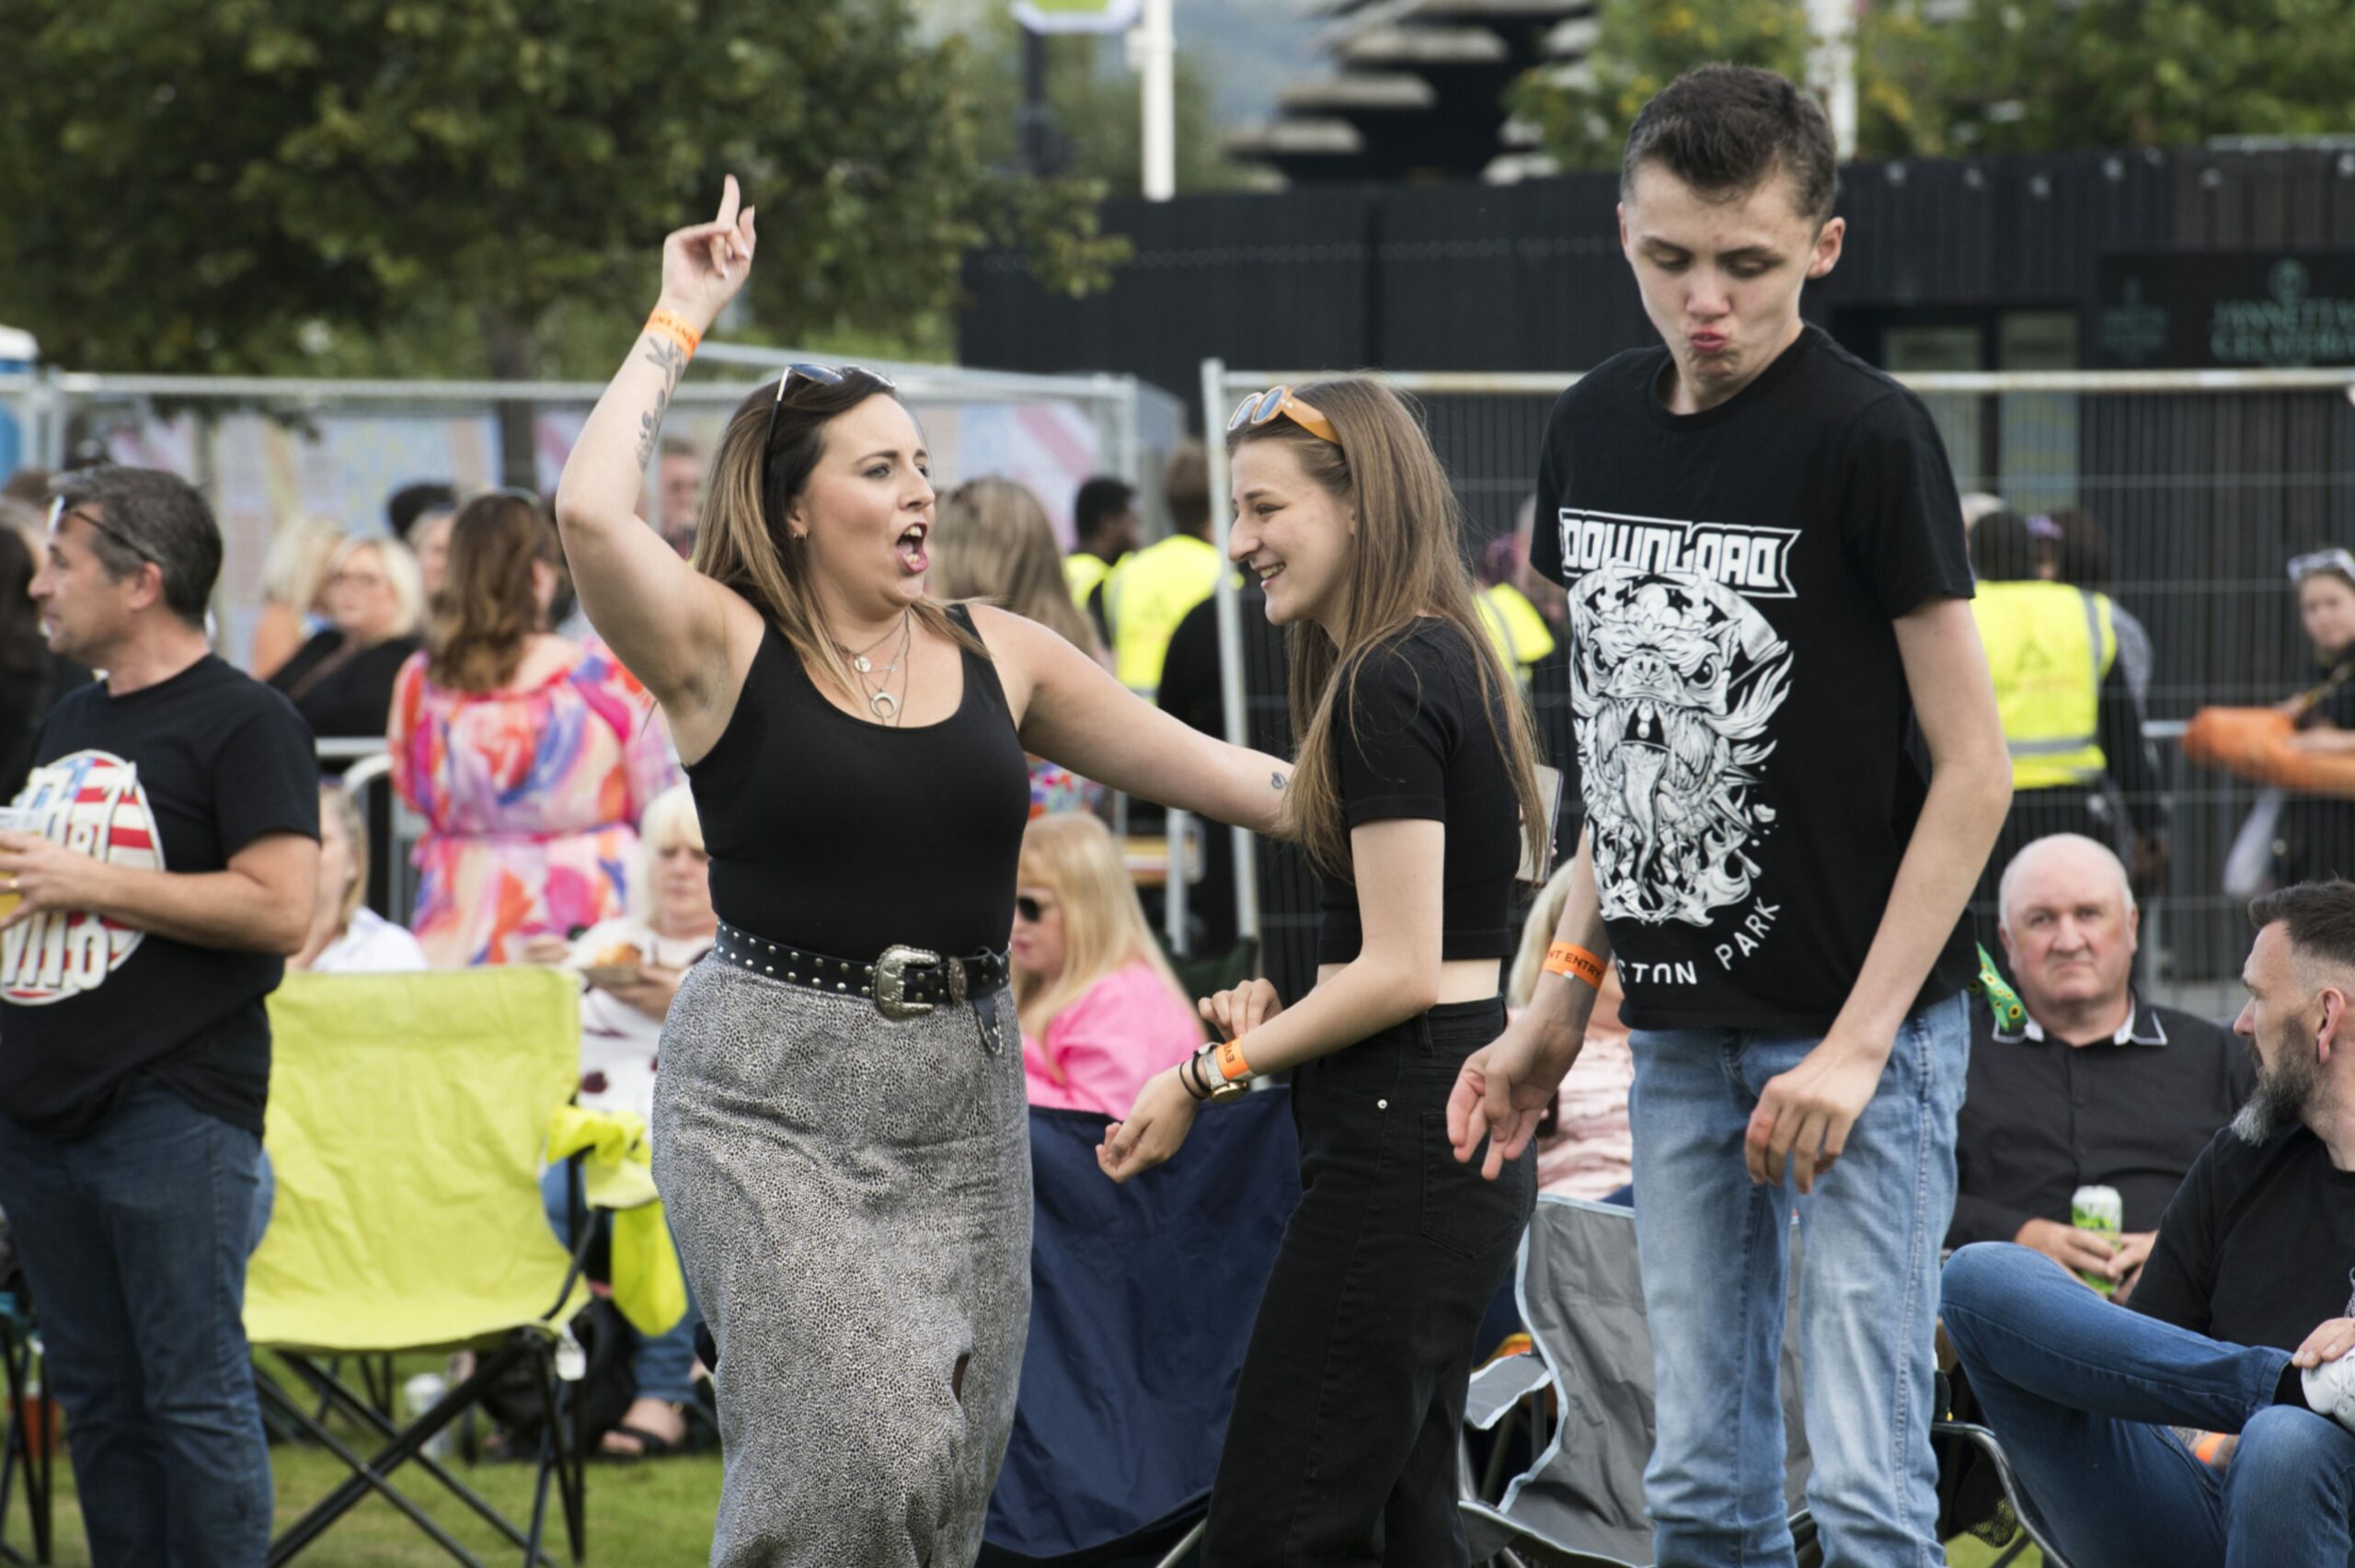 Revellers let loose at the Sausage and Cider Festival at Dundee's Slessor Gardens.